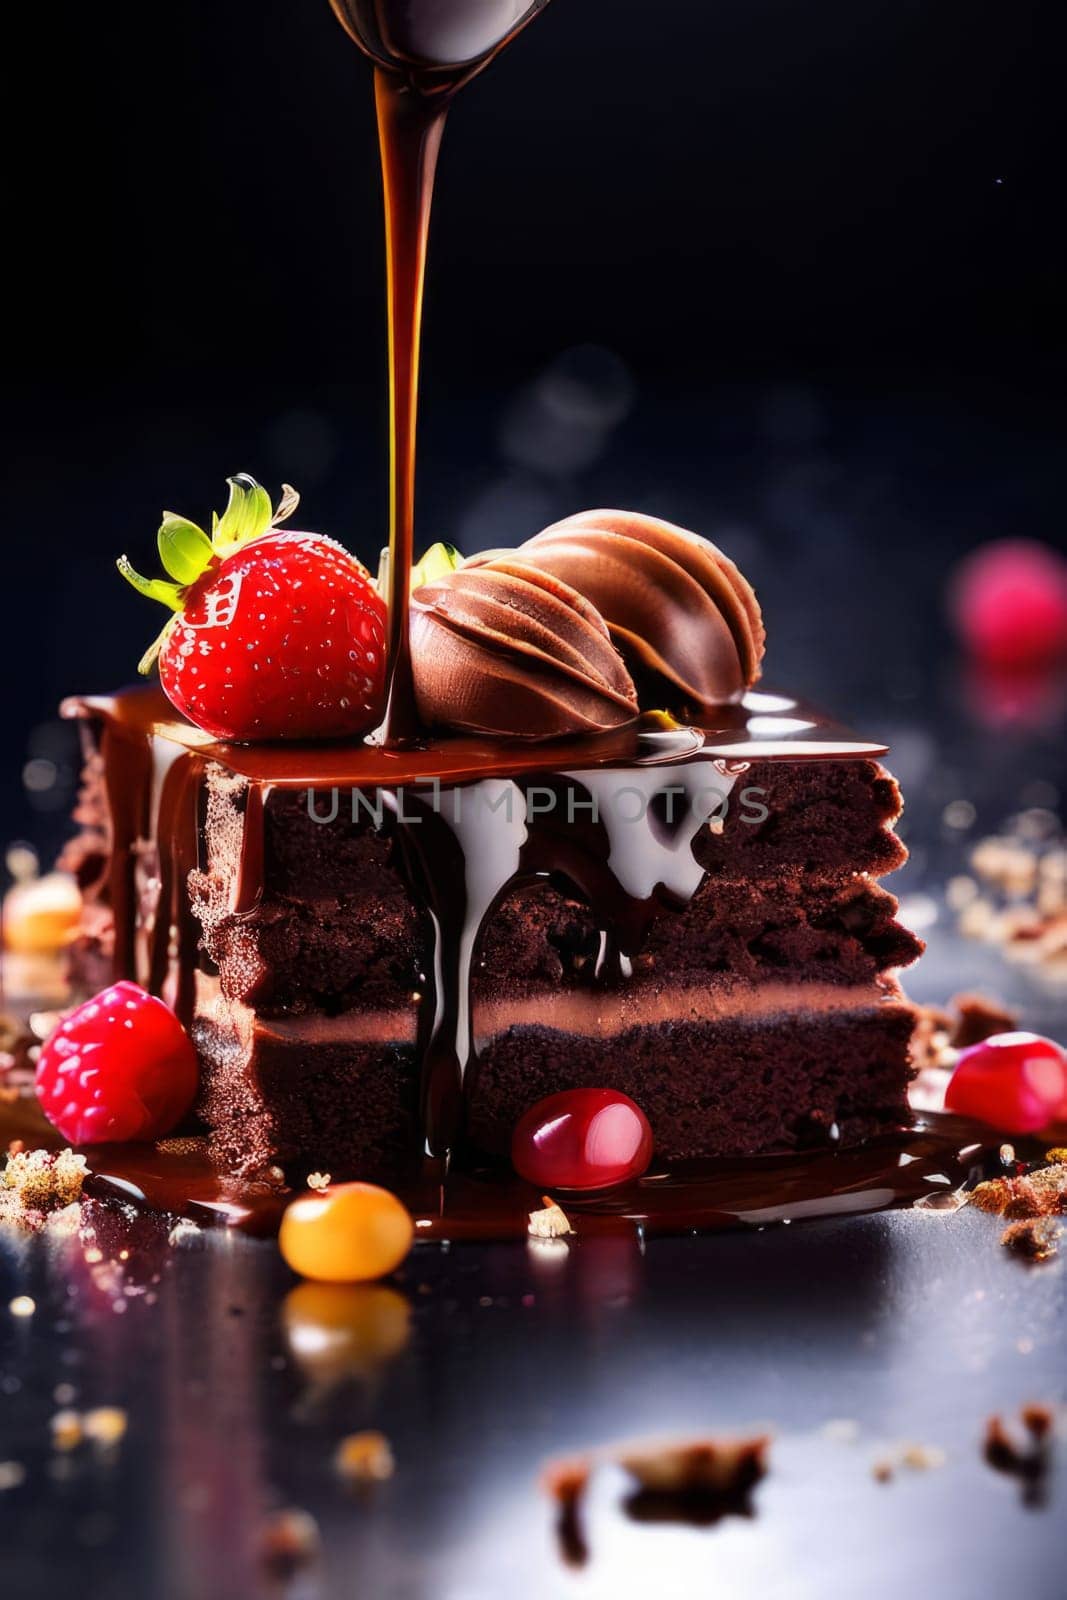 Decadent chocolate cake adorned with fresh strawberries, crunchy nuts, elegantly presented on plate. For restaurant websites, cafe, bakery menus, food blogs, magazines, food, home baking inspiration